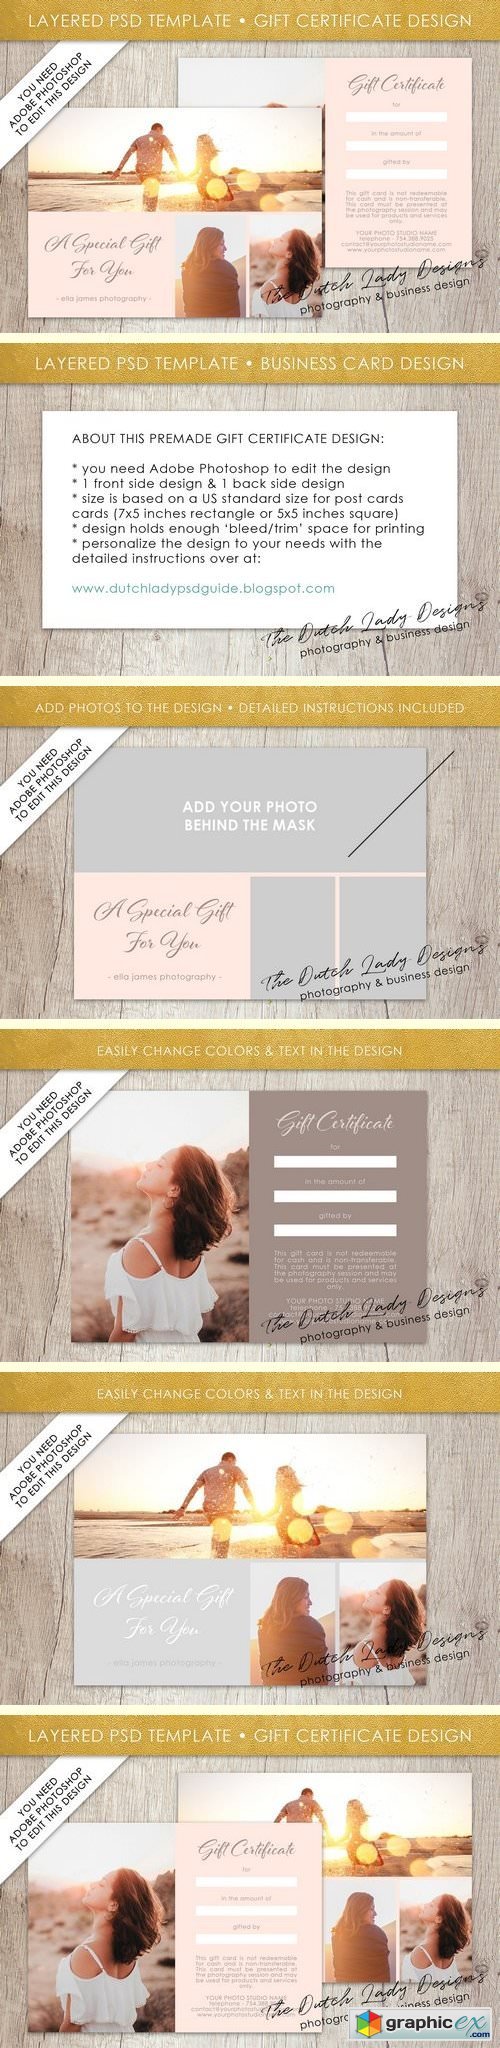 PSD Photo Gift Card Template #1